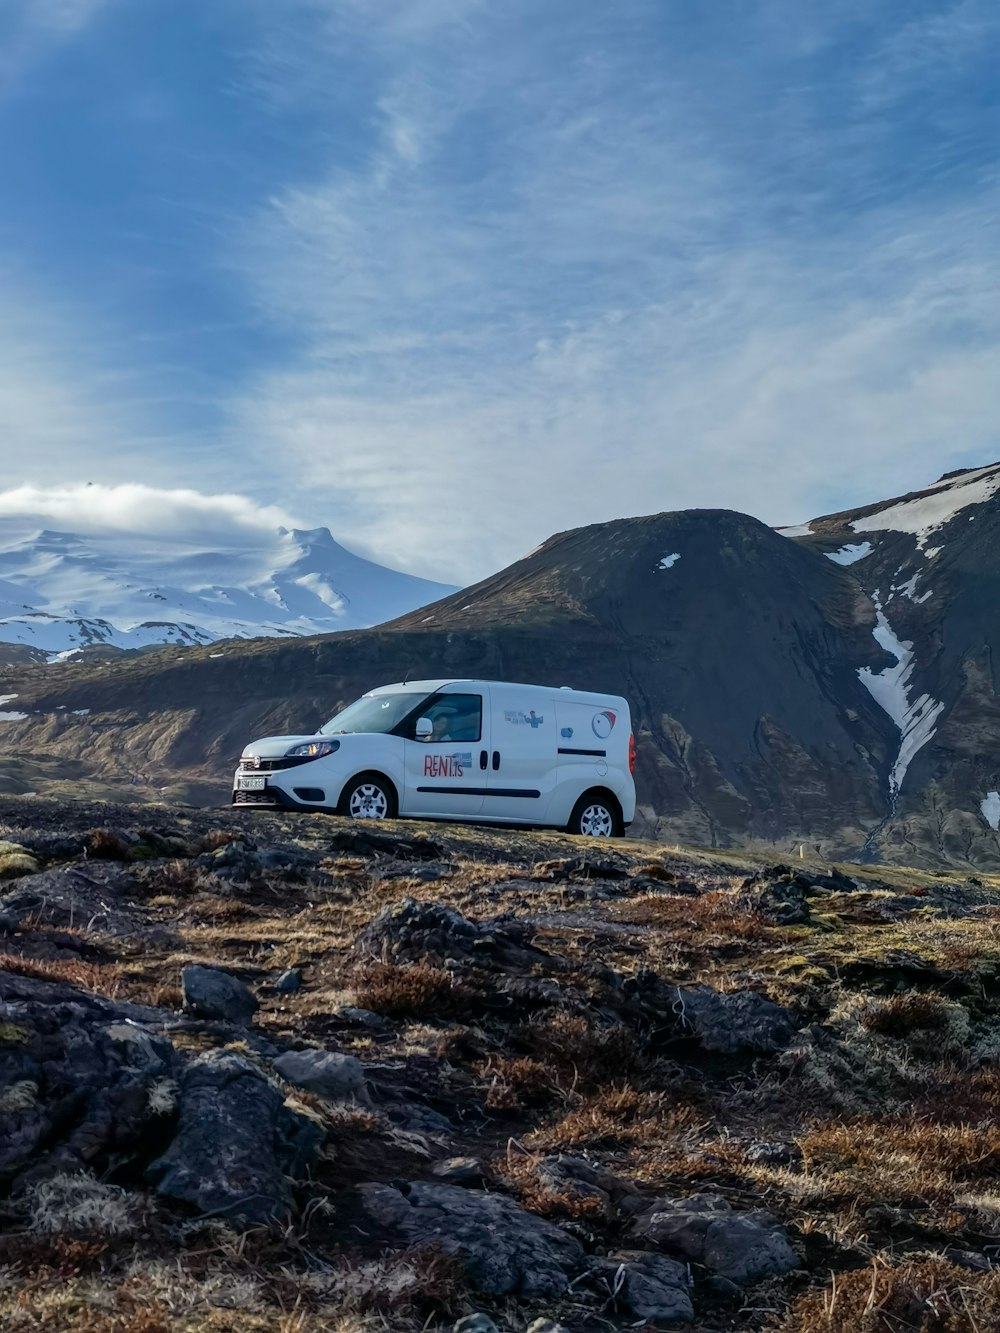 a van is parked in a field with mountains in the background